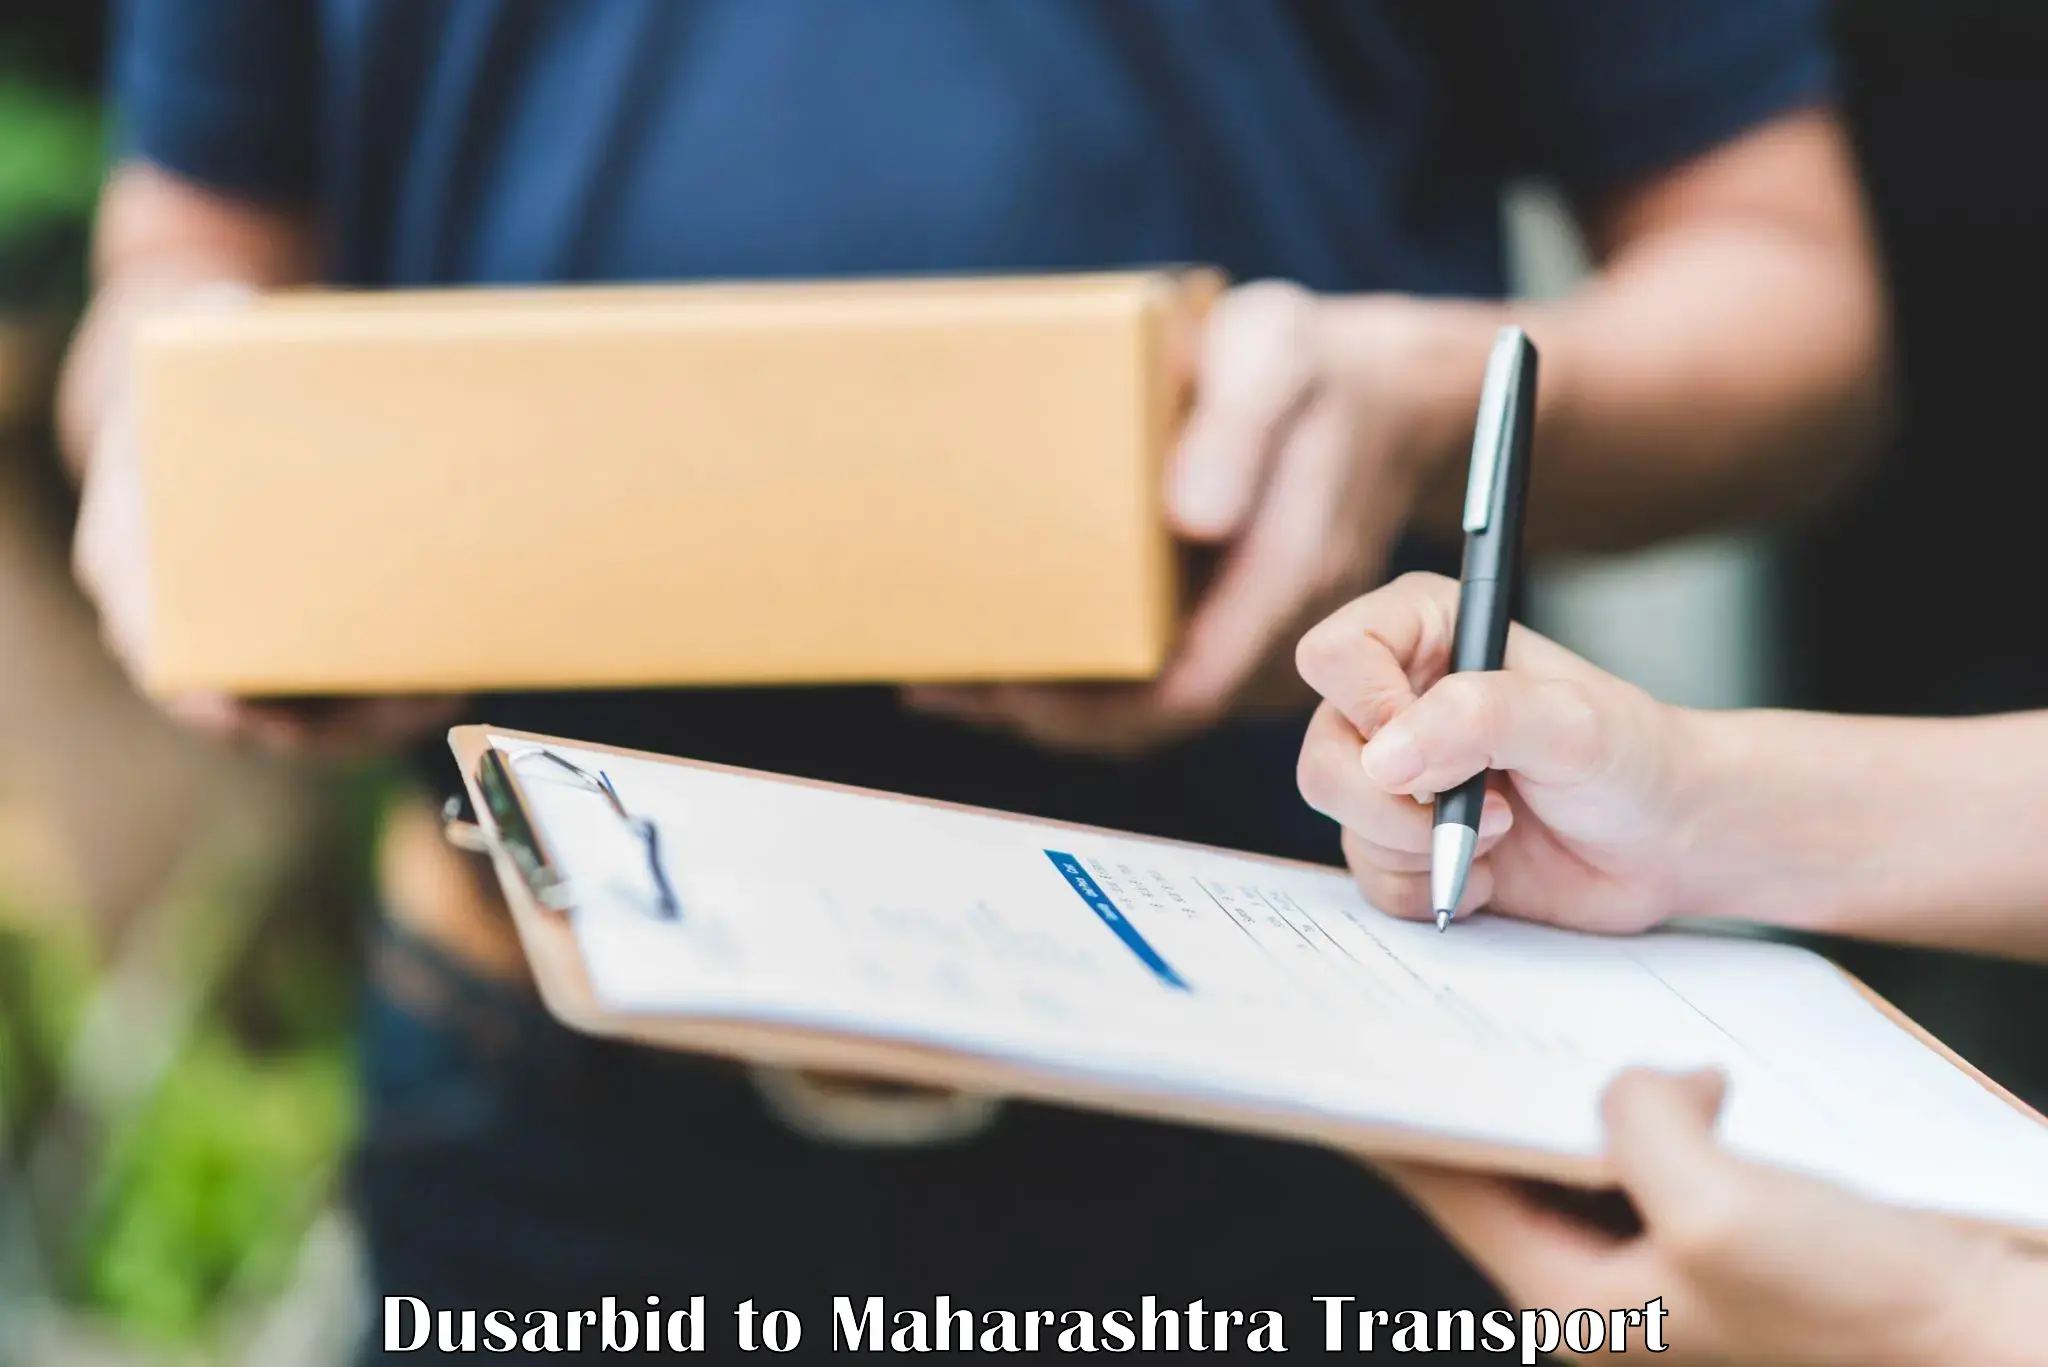 Air freight transport services in Dusarbid to Maharashtra